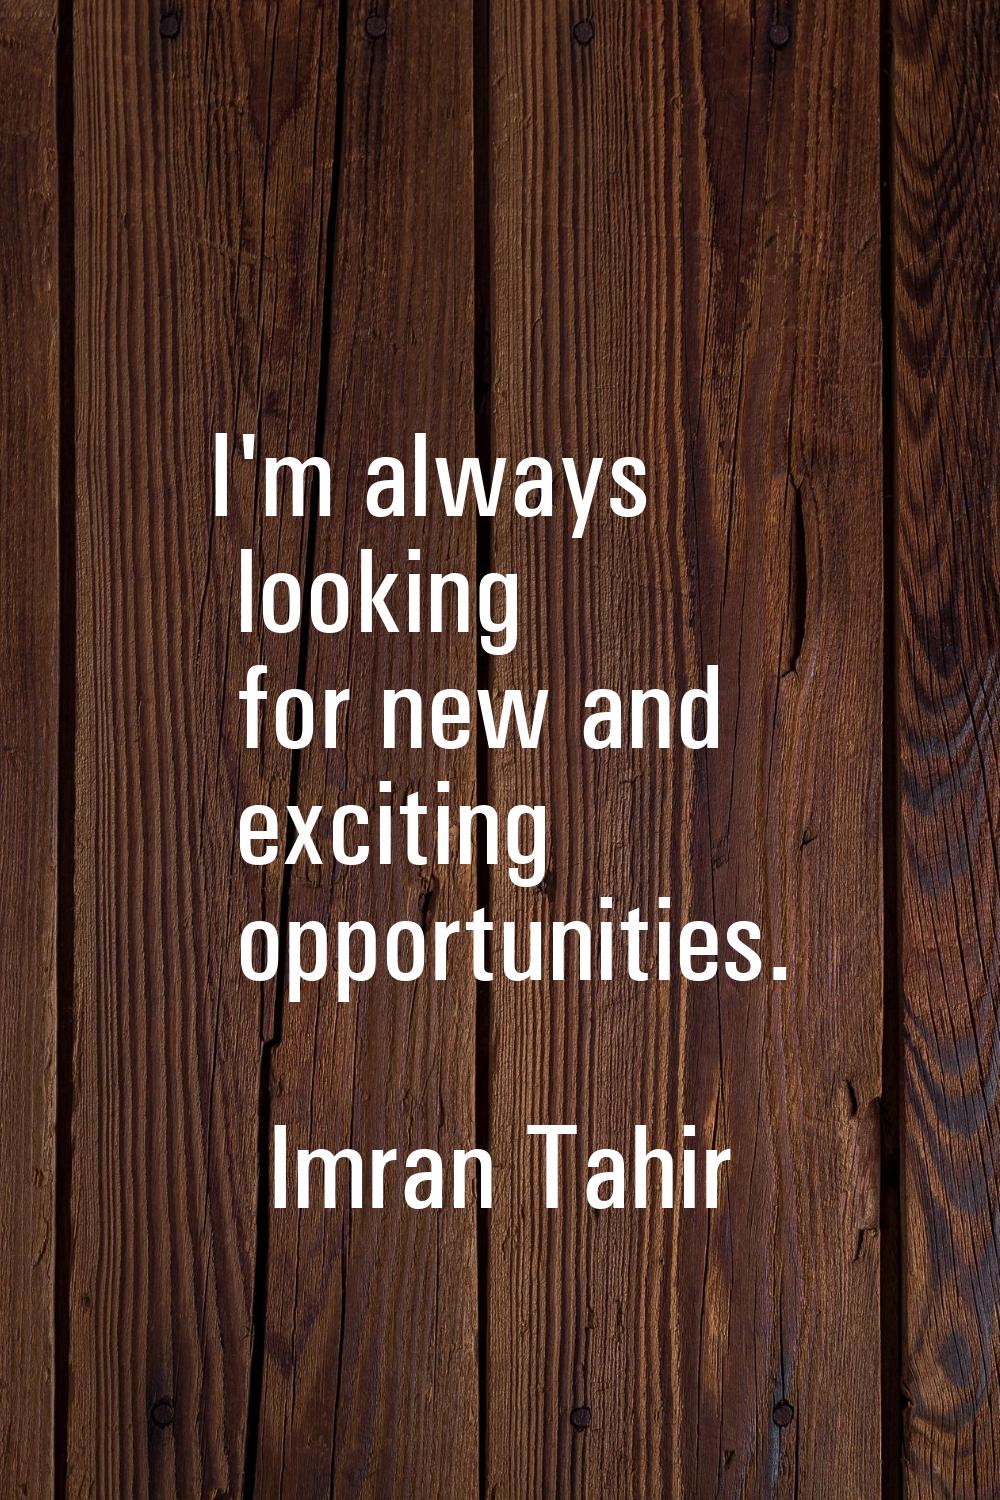 I'm always looking for new and exciting opportunities.